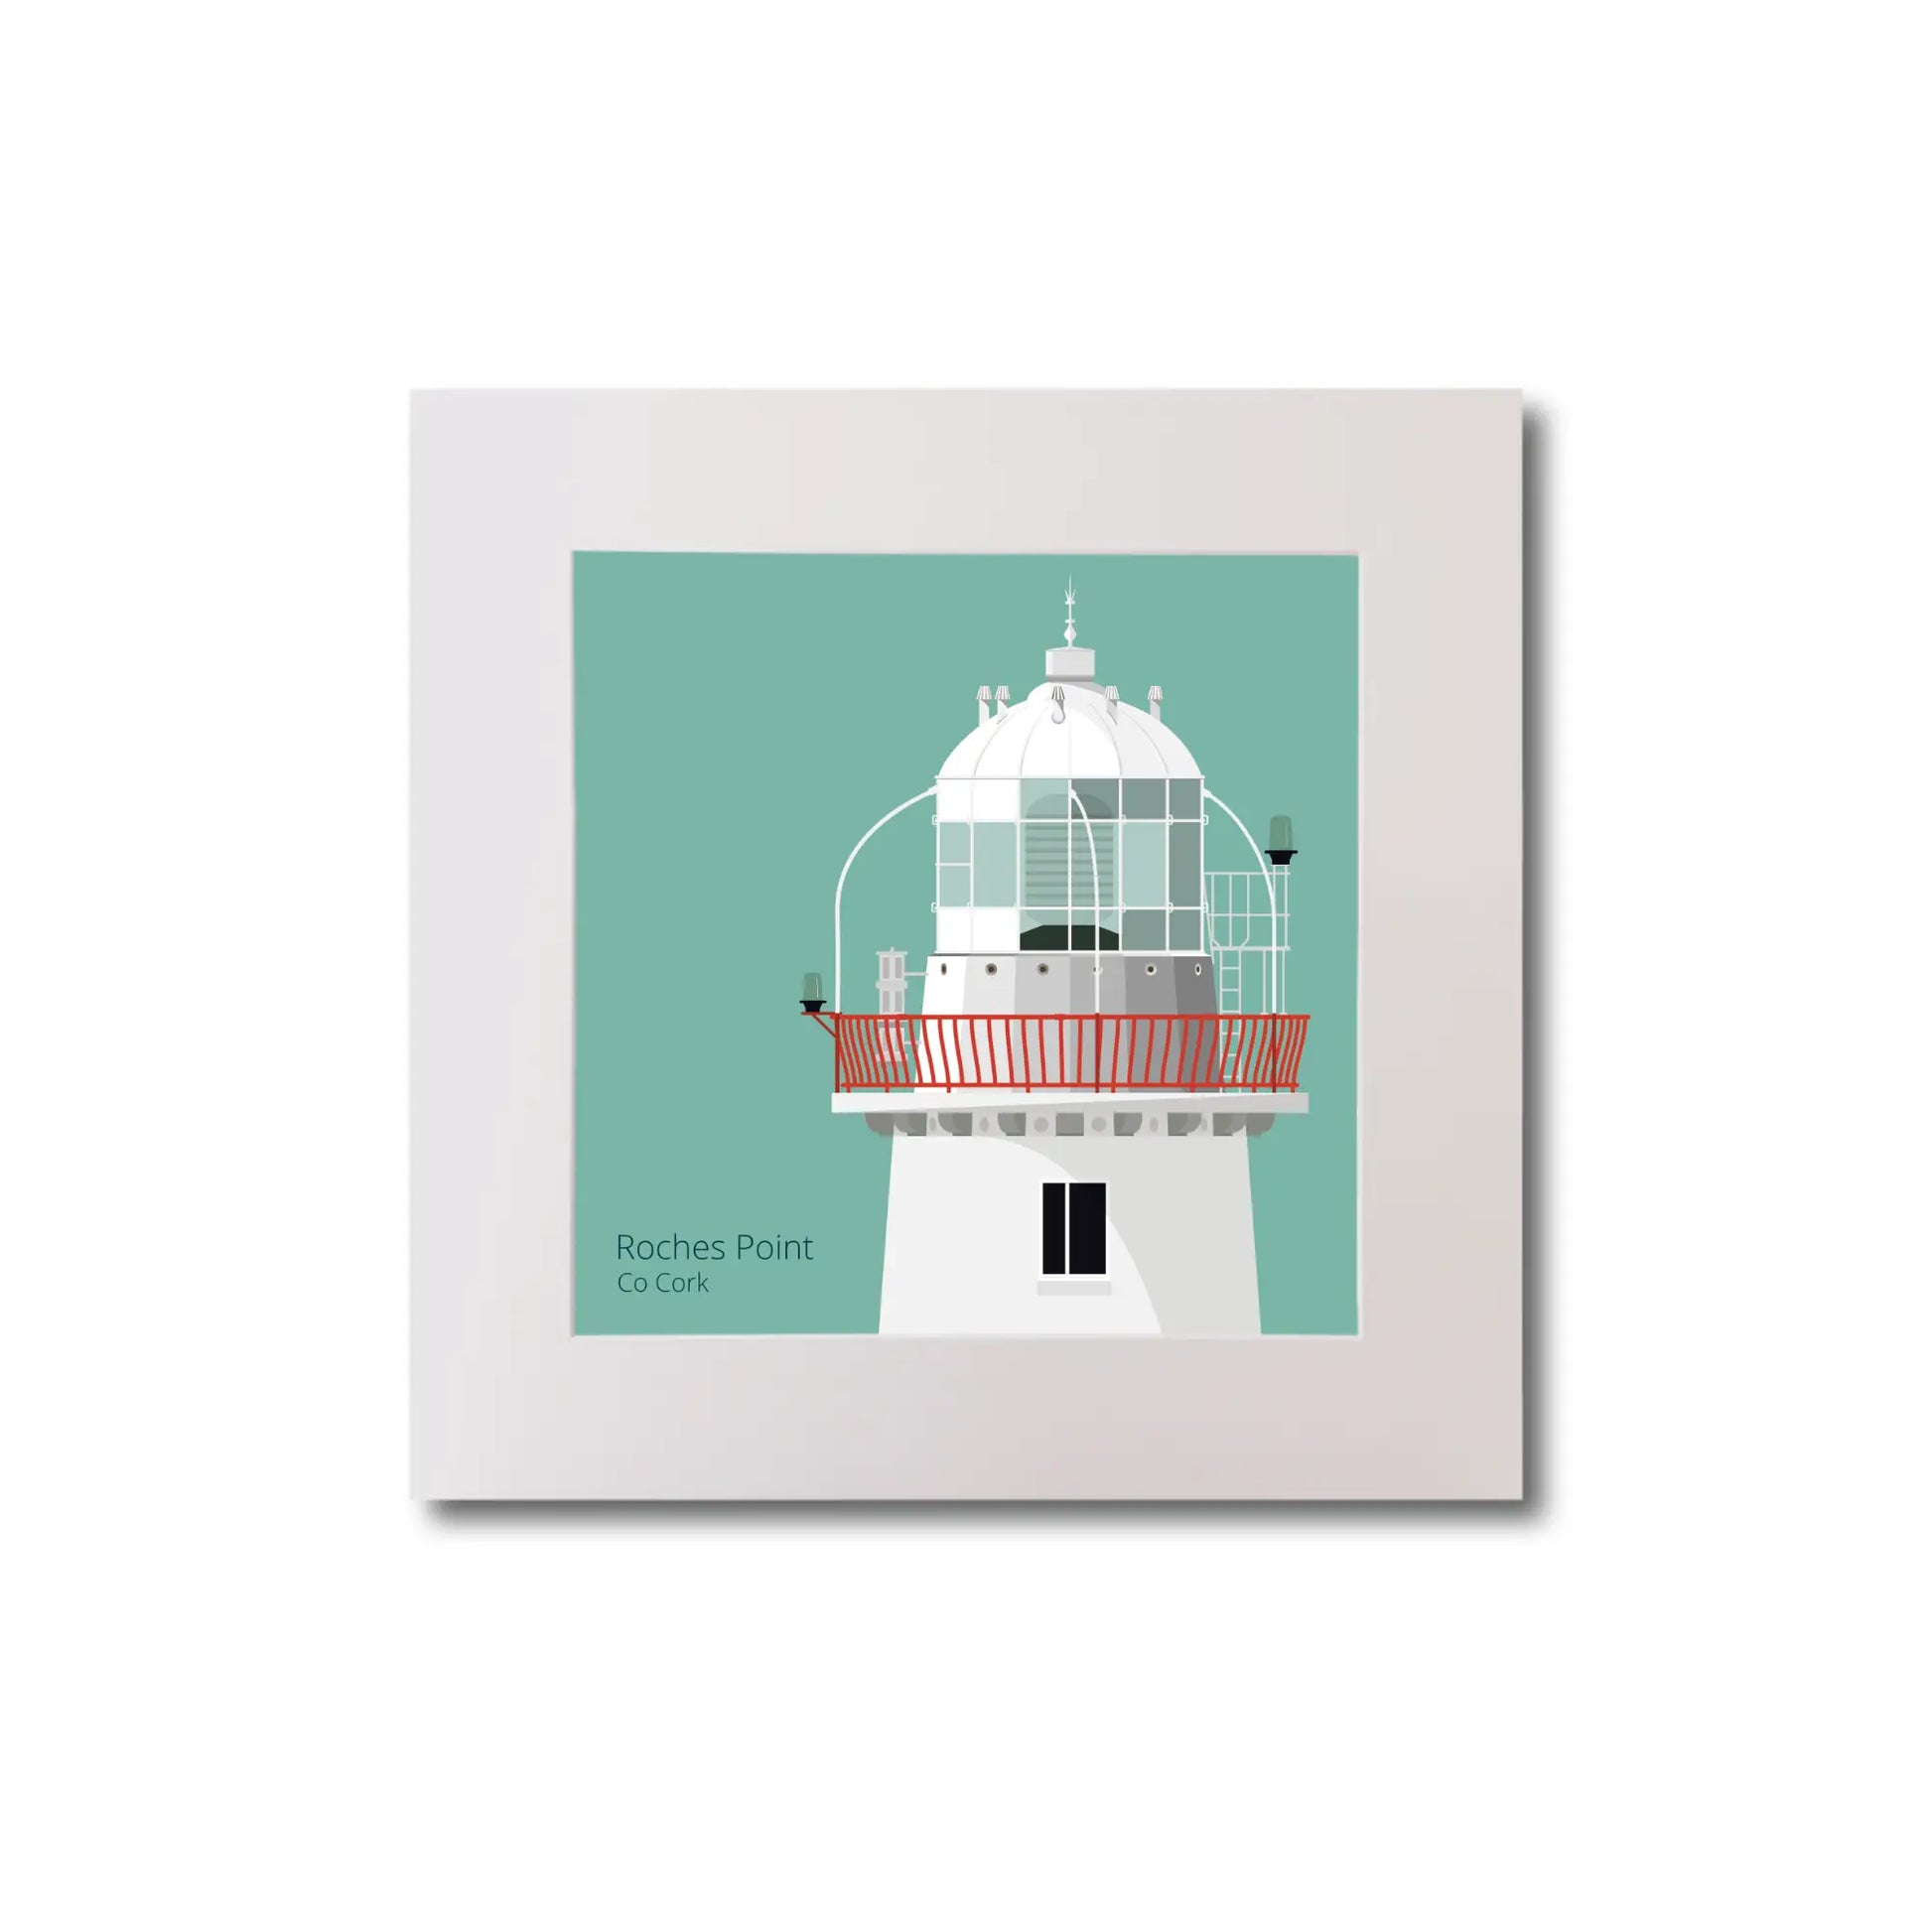 Illustration of Roches Point lighthouse on an ocean green background, mounted and measuring 20x20cm.